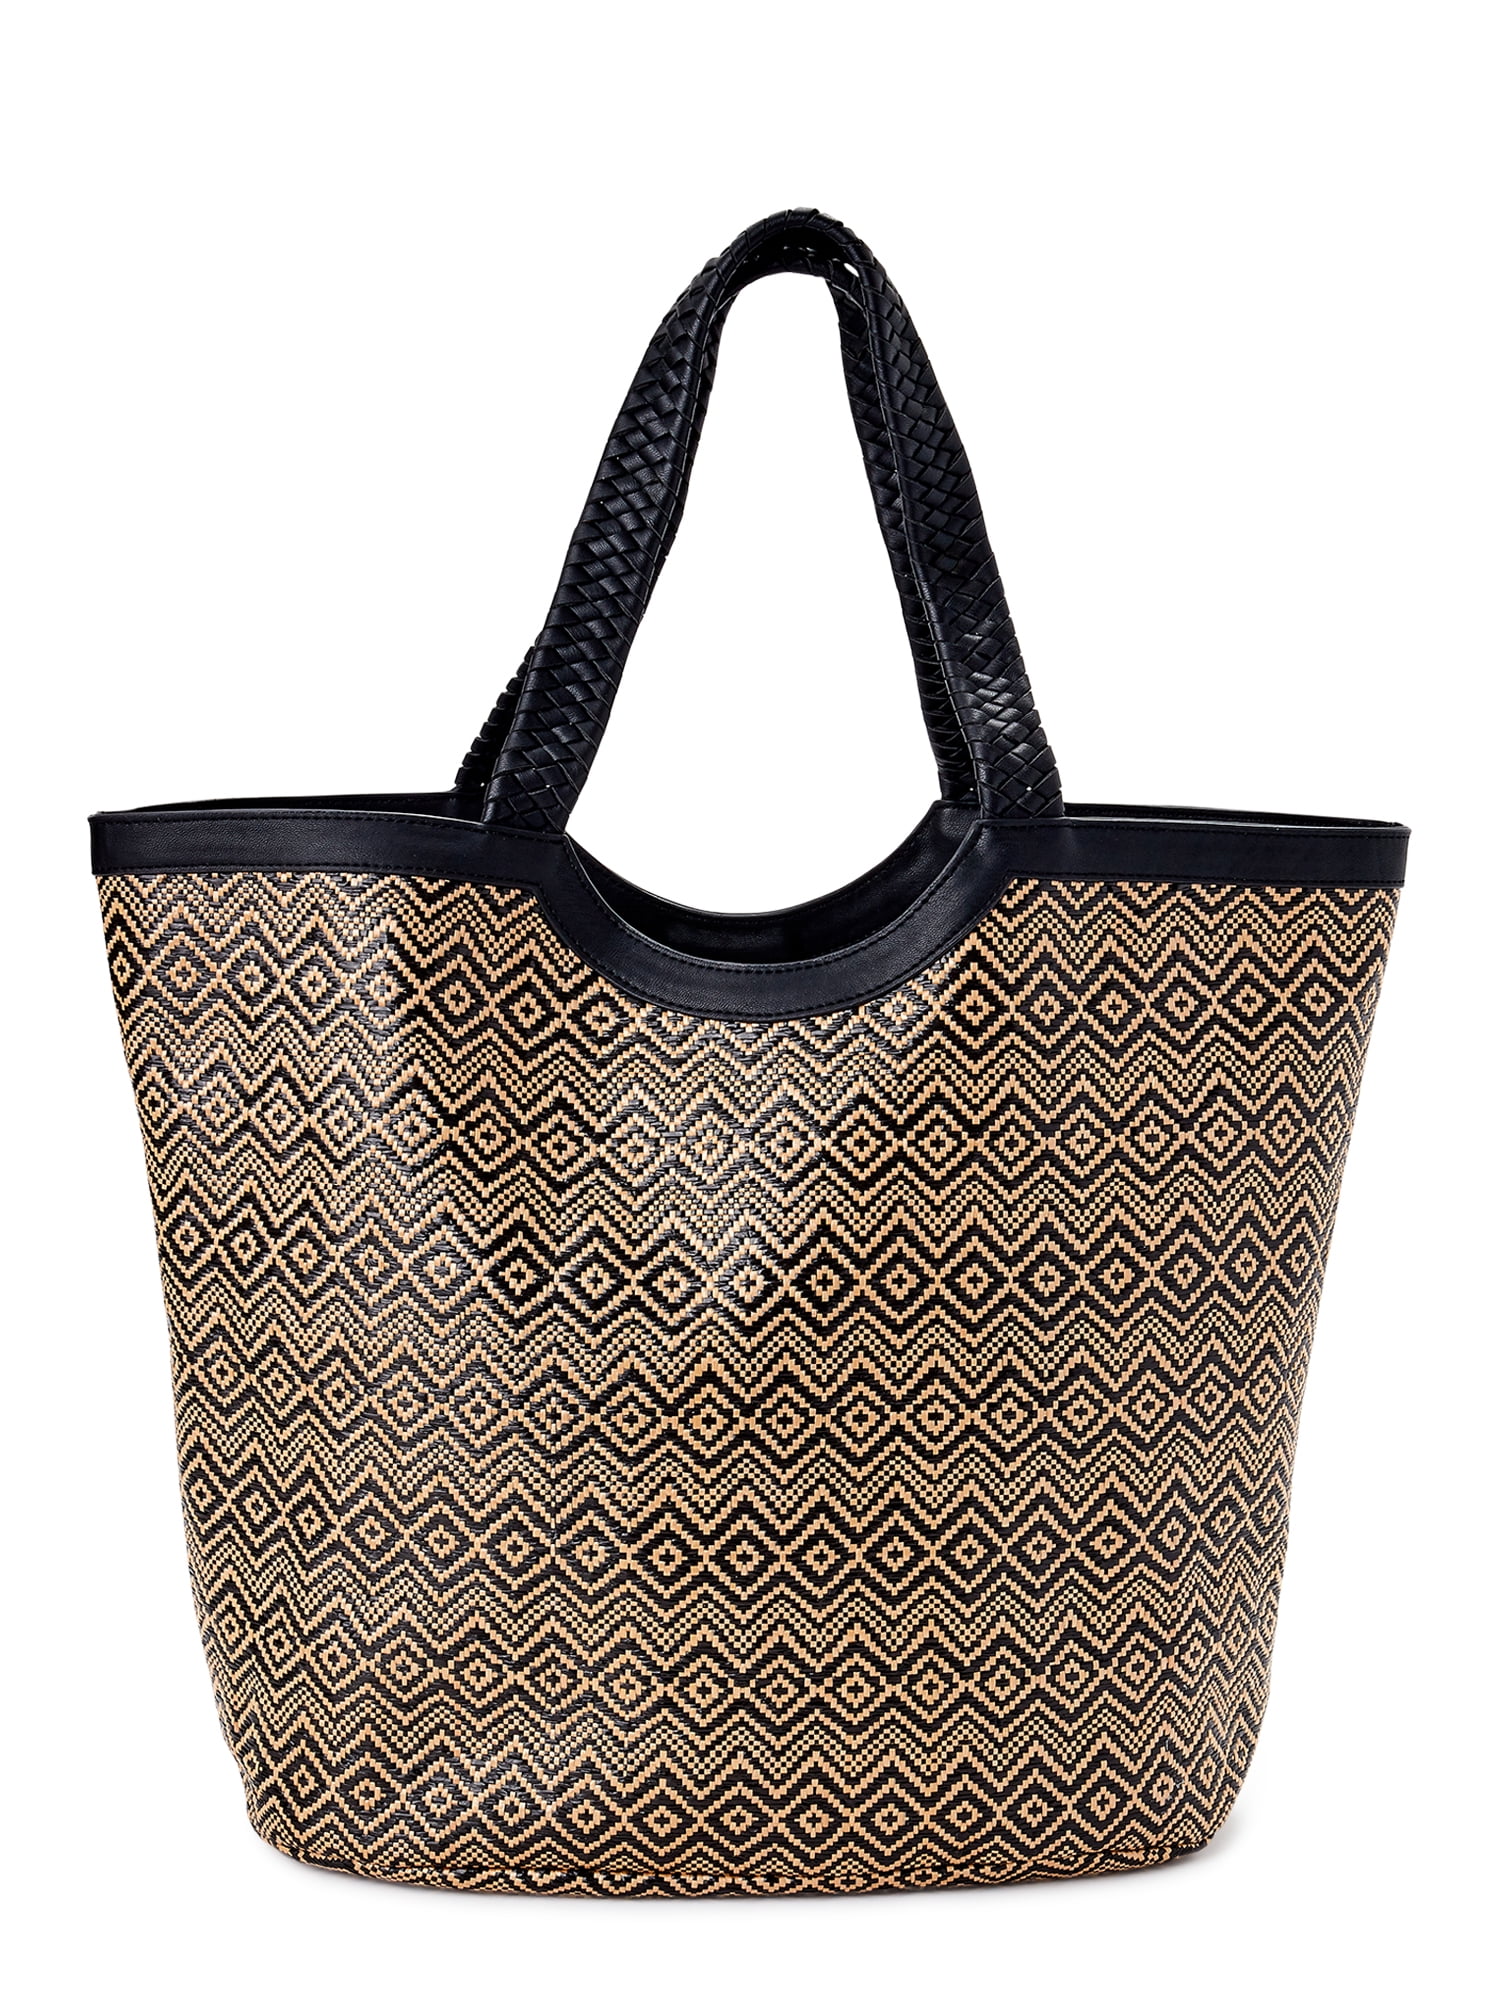 Time and Tru Women's Extra Large Woven Straw Beach Travel Tote